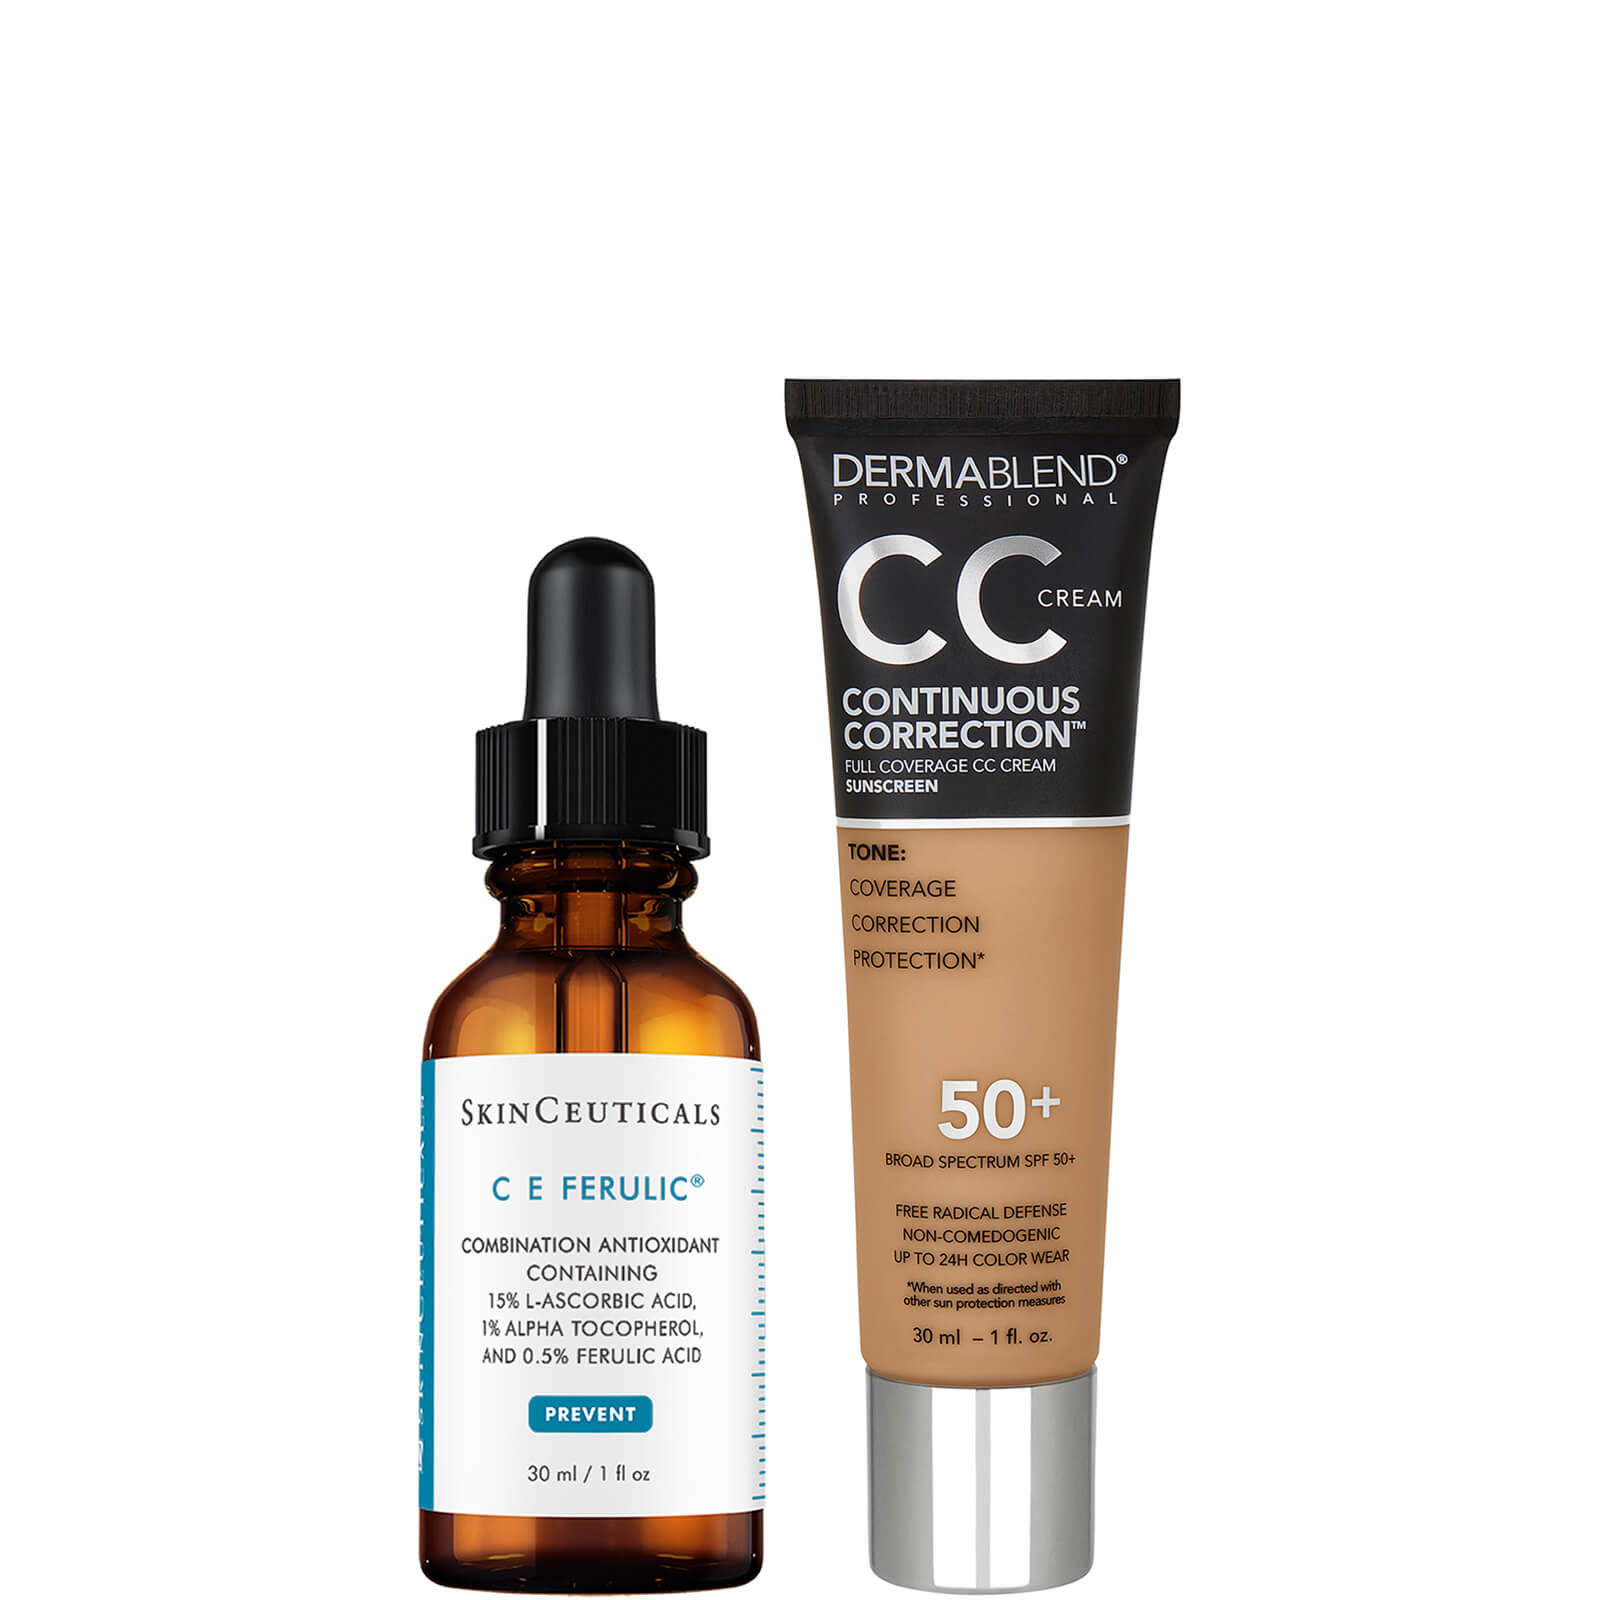 SkinCeuticals and Dermablend Anti-Aging Brightening Duo with Vitamin C and Niacinamide (Various Shades) ($223 Value) - 45N Med to Tan